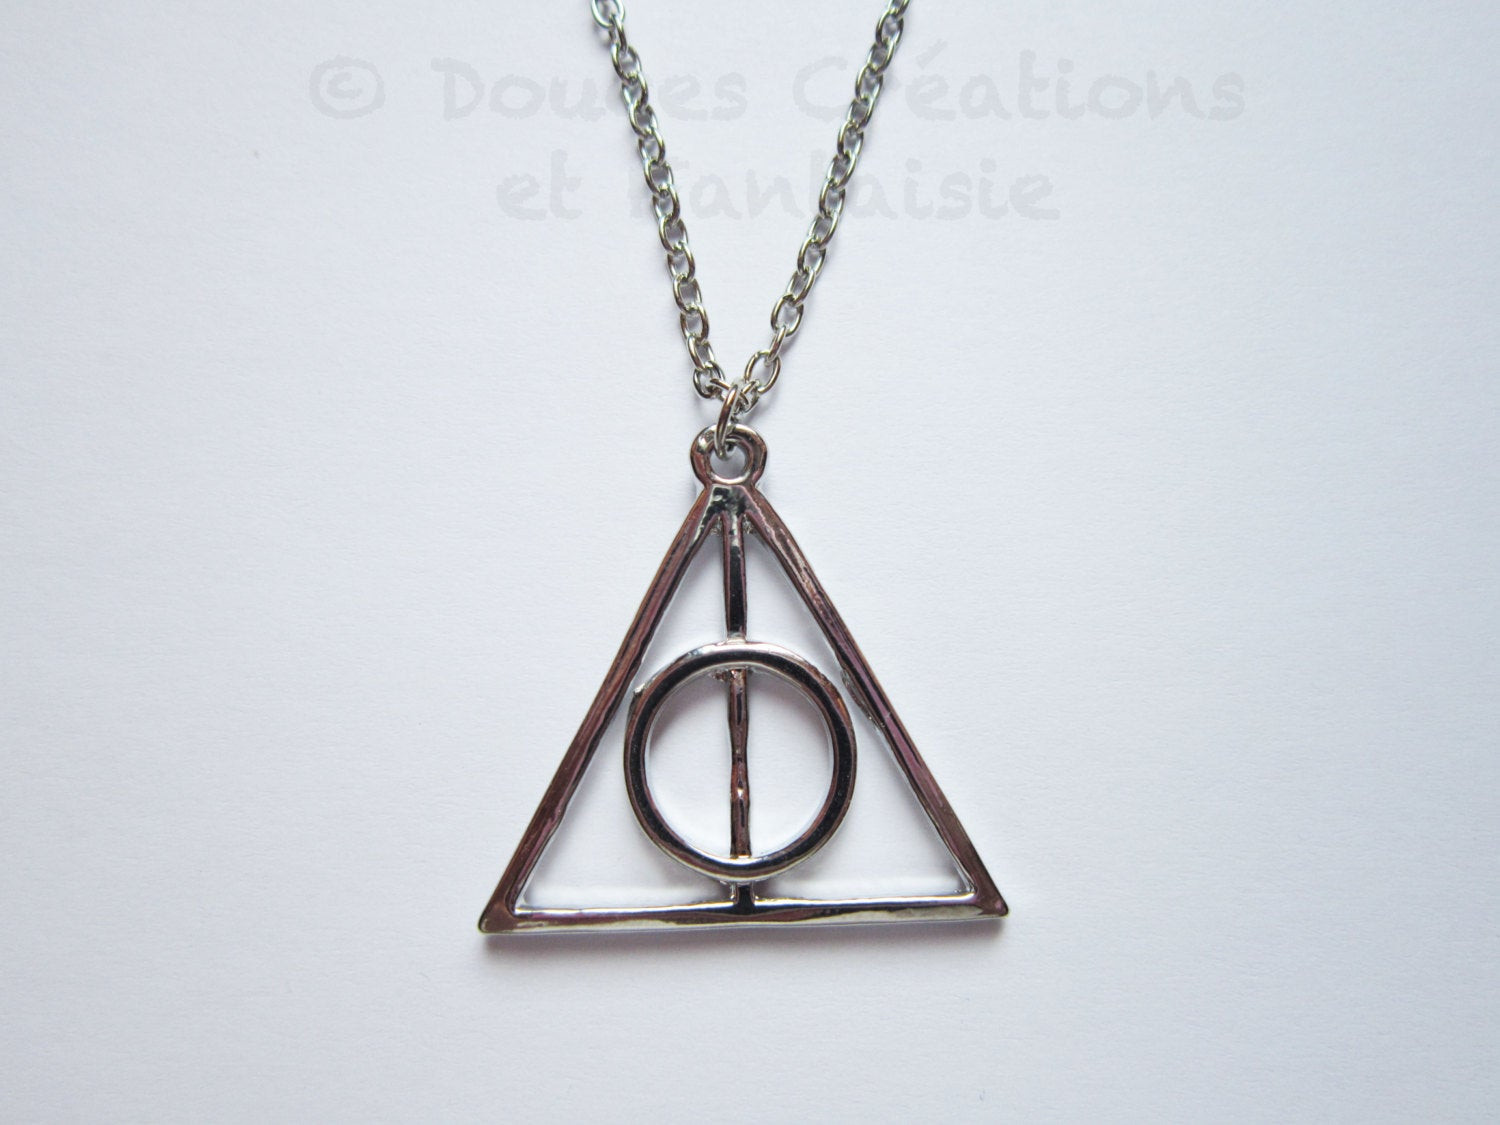 Harry Potter Deathly Hallows Necklace
 Deathly Hallows necklace Harry Potter jewelry by